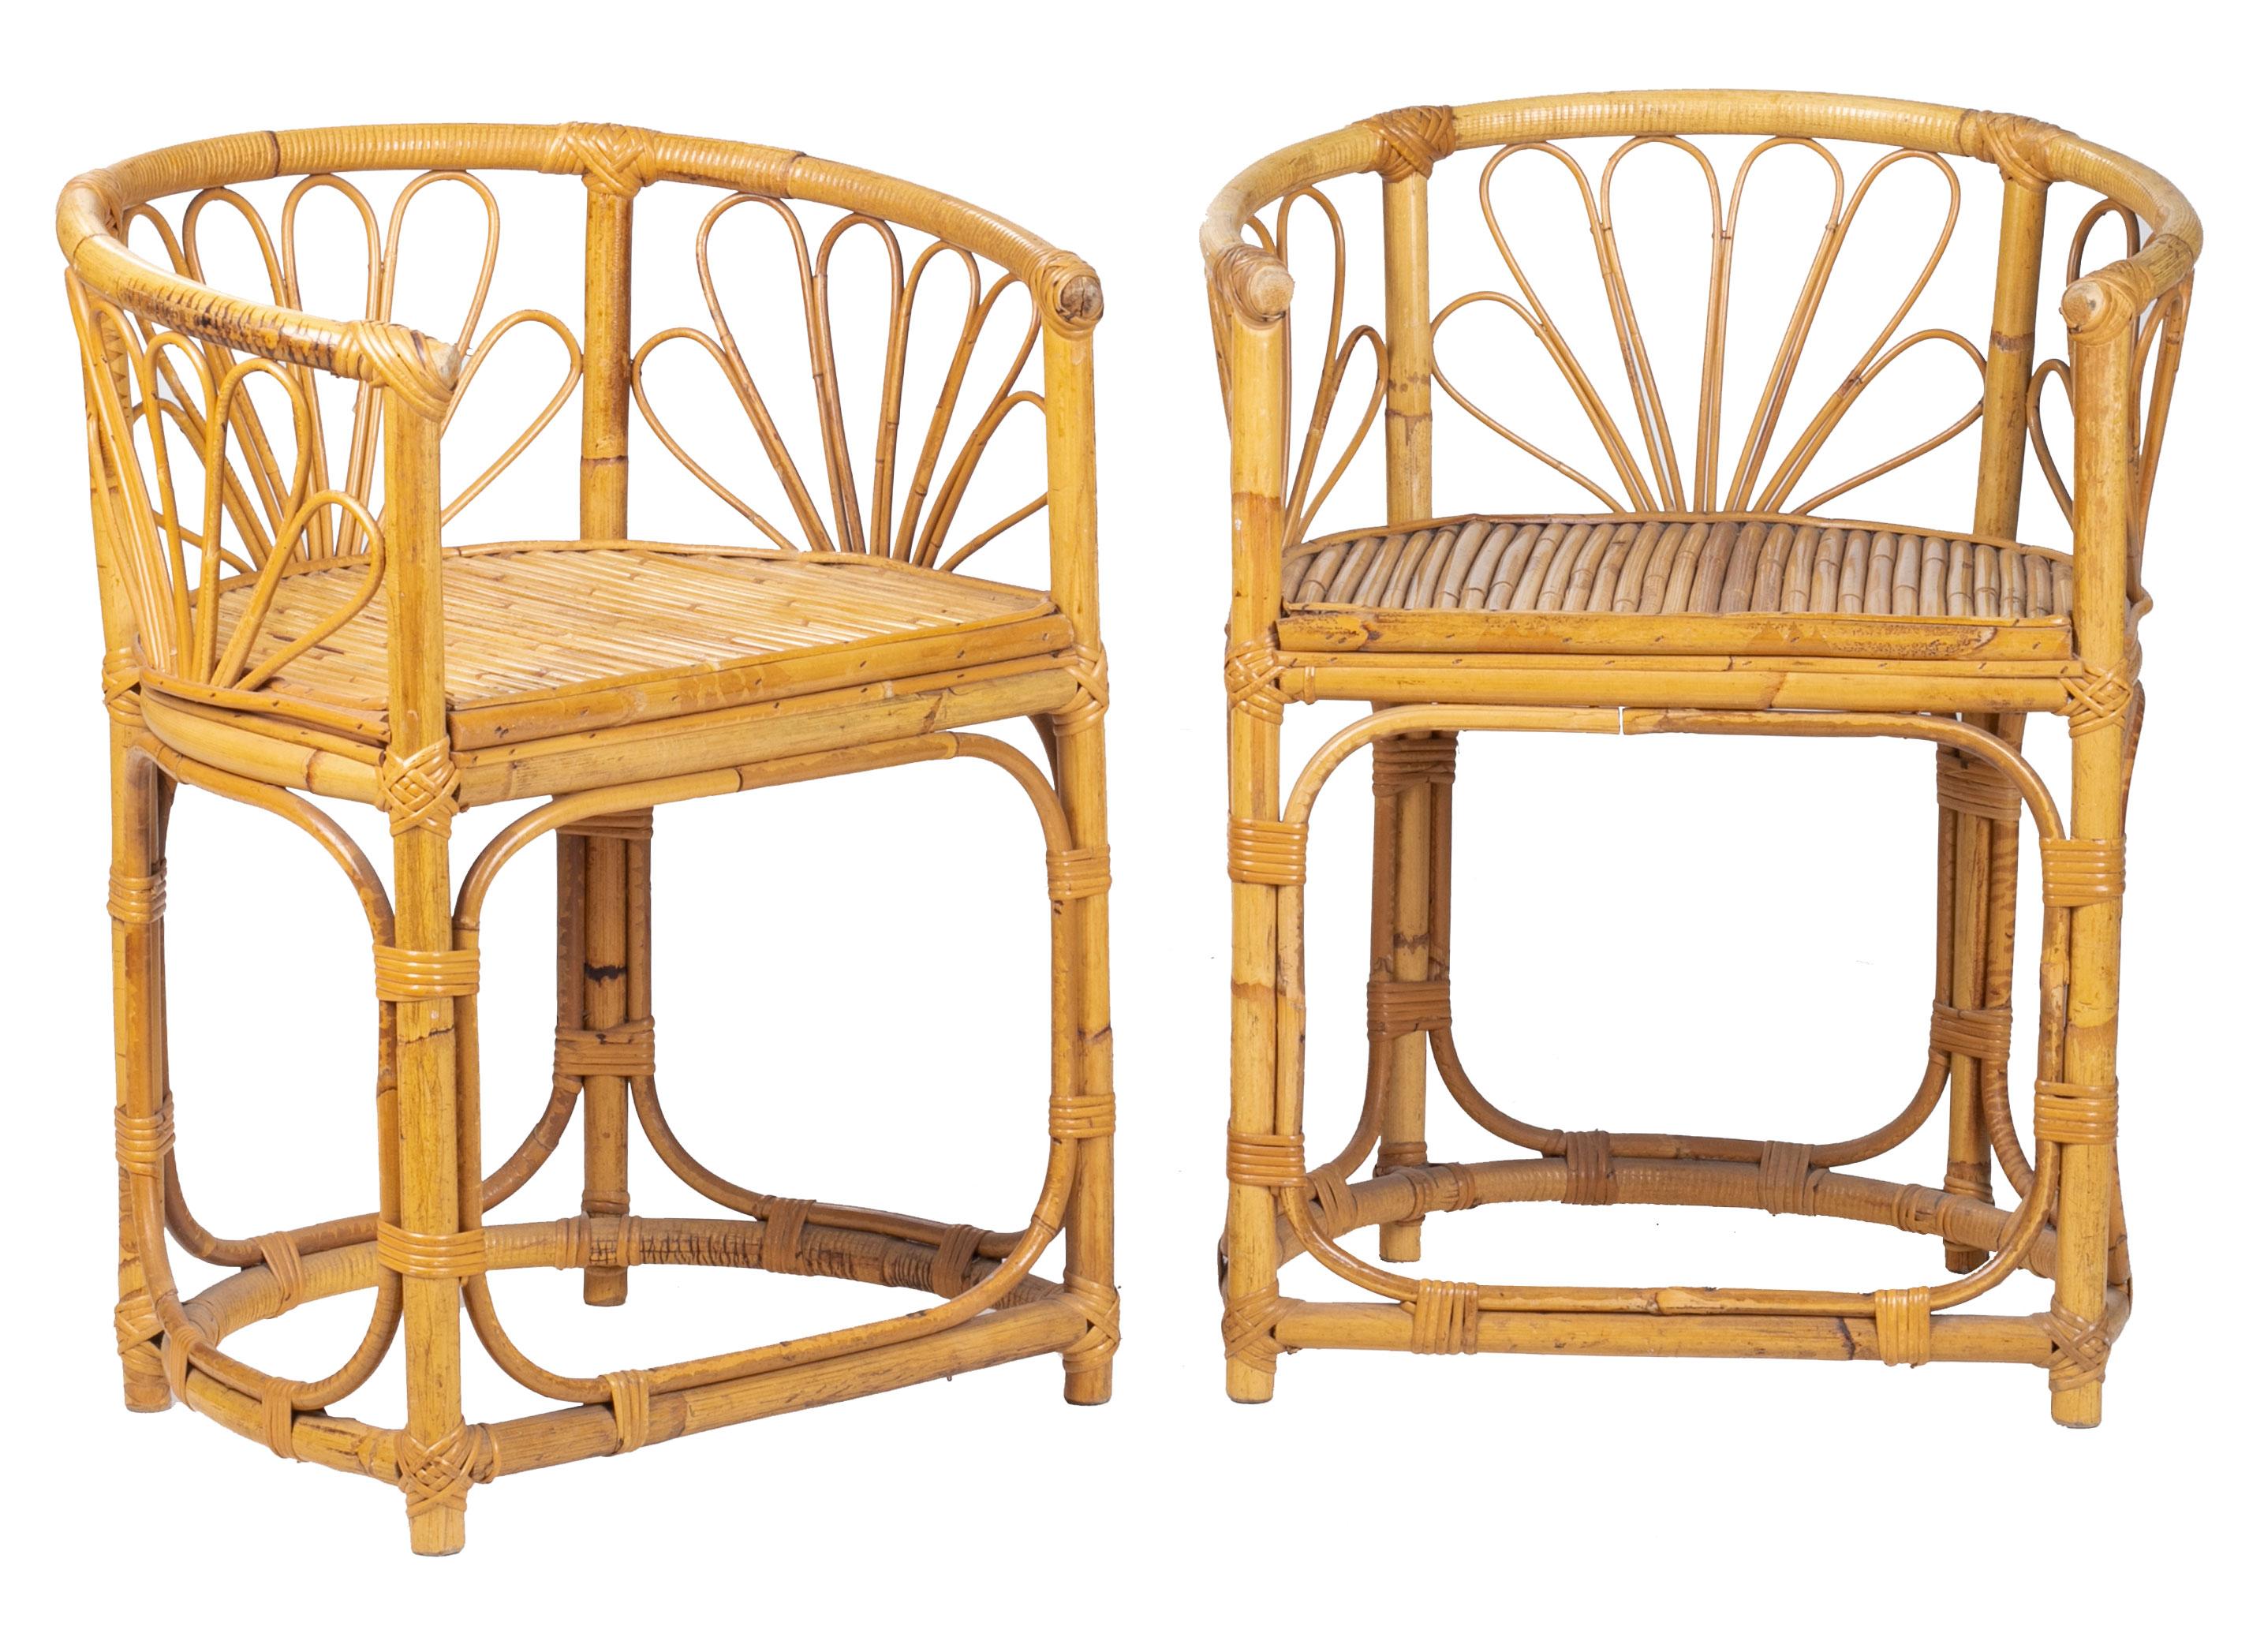 1980s Spanish bamboo set consisting of a table and two armchairs

Chair measures: 65 x 50 x 45cm
Table measures: 40 x 42 x 42cm.